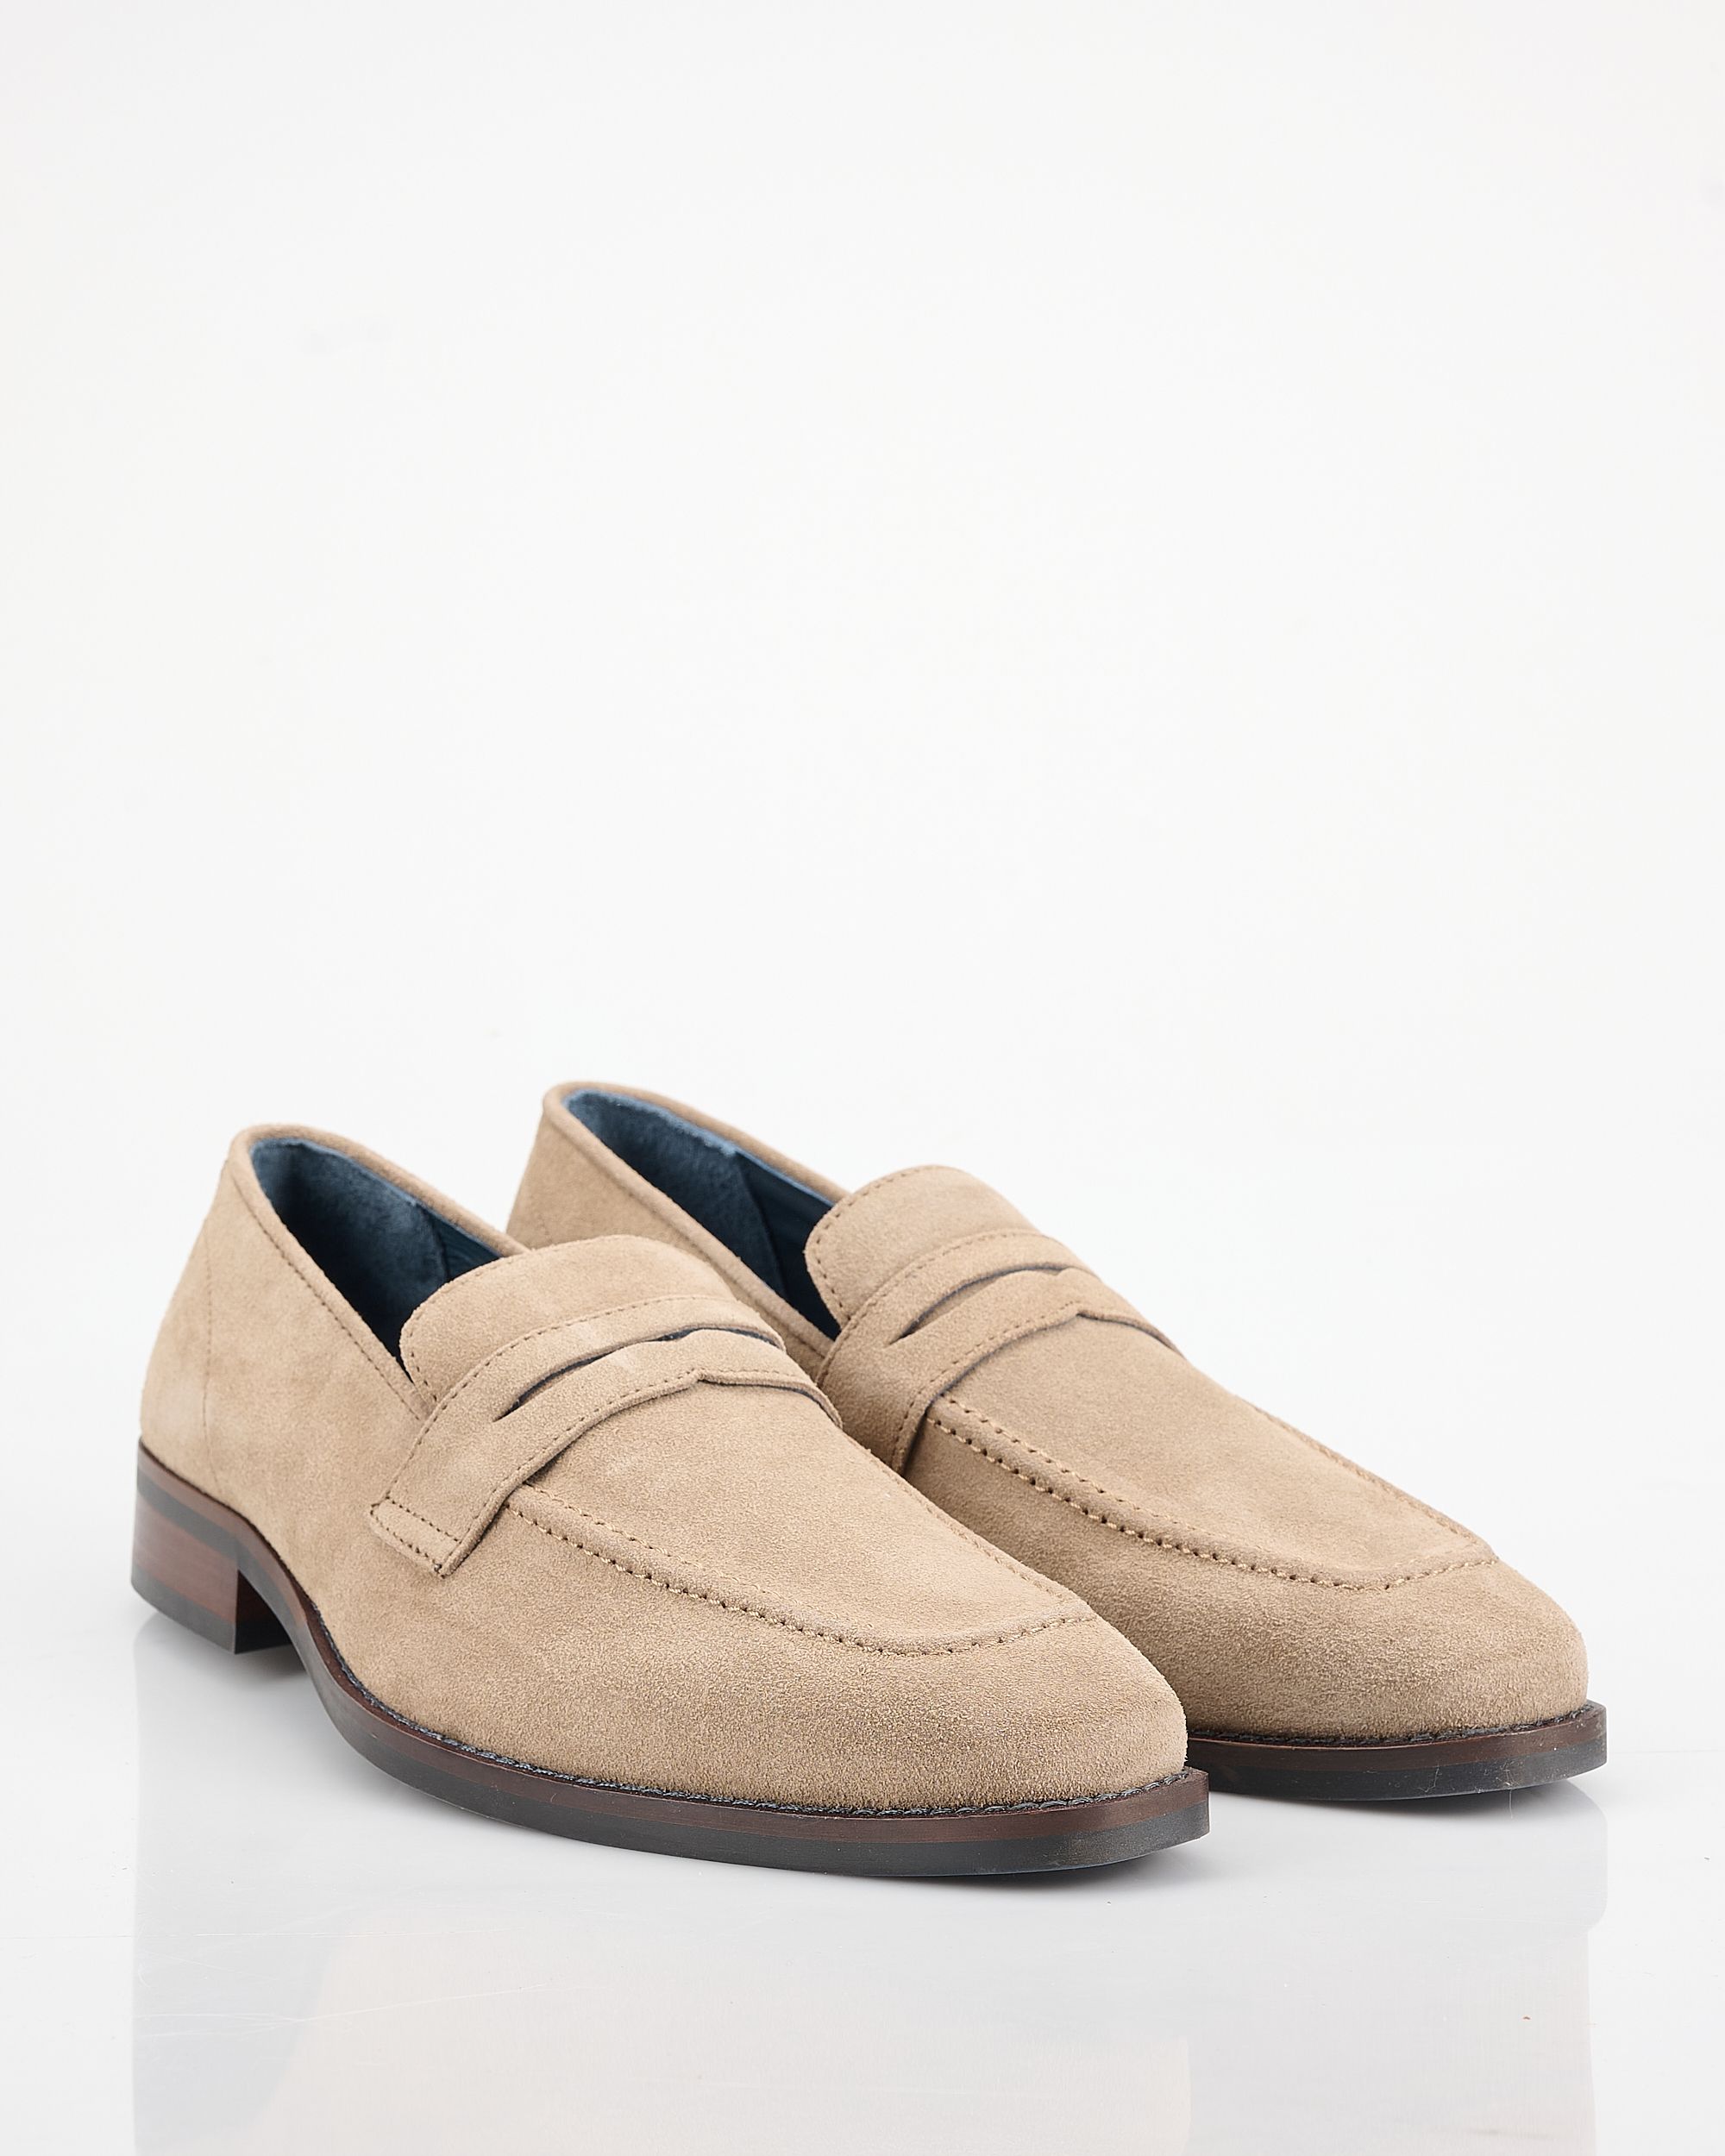 Recall - Loafers Taupe 091870-002-44